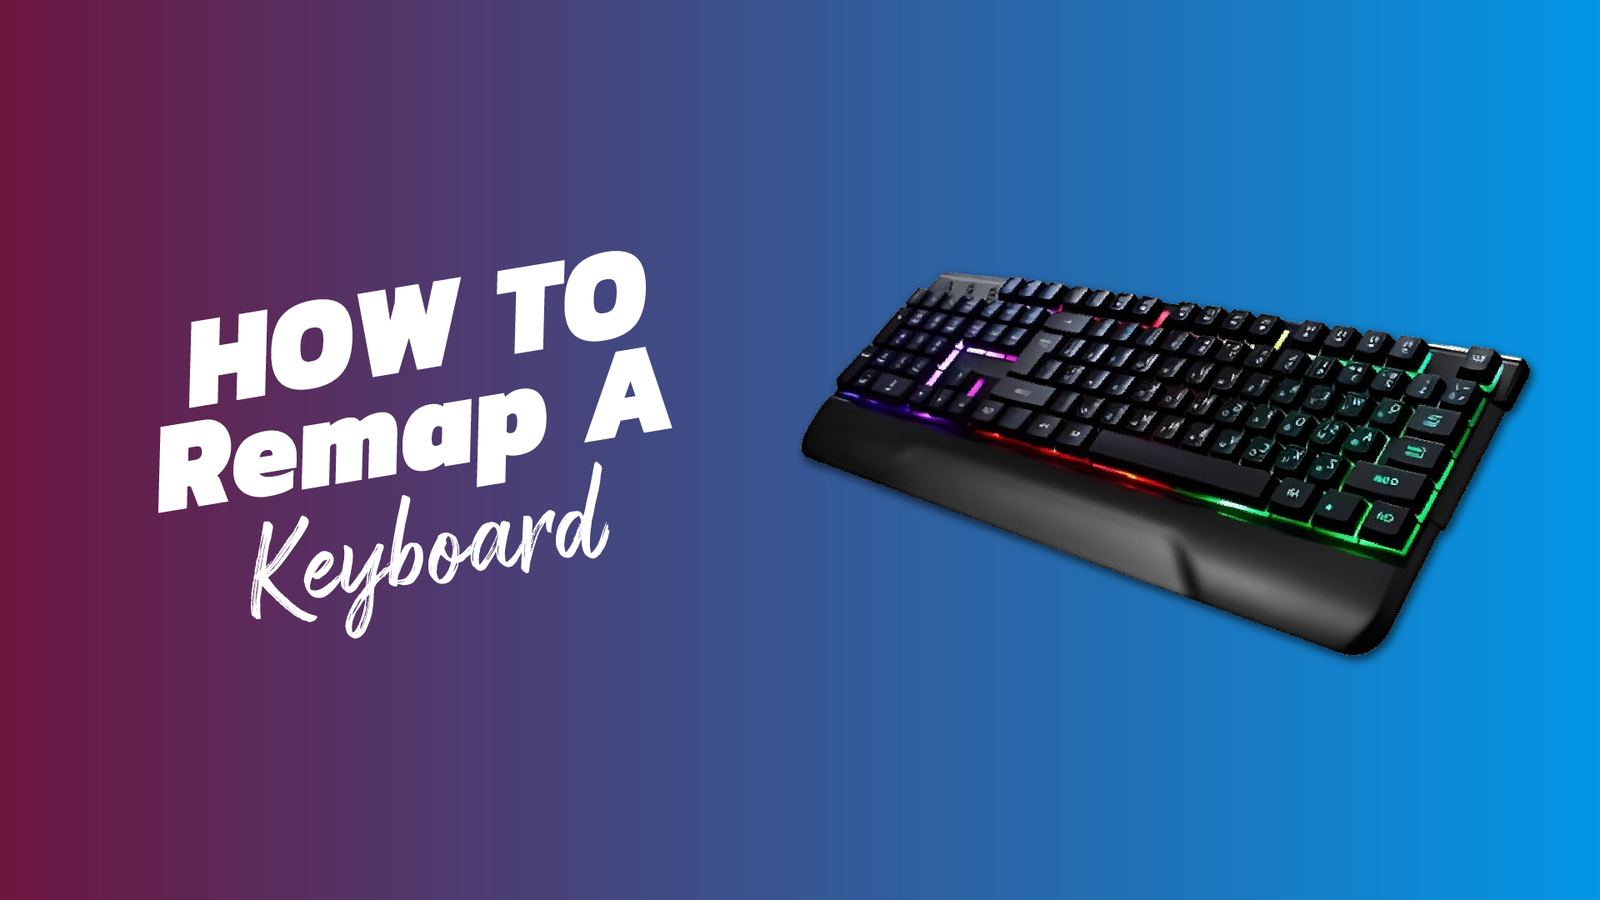 How to remap a keyboard